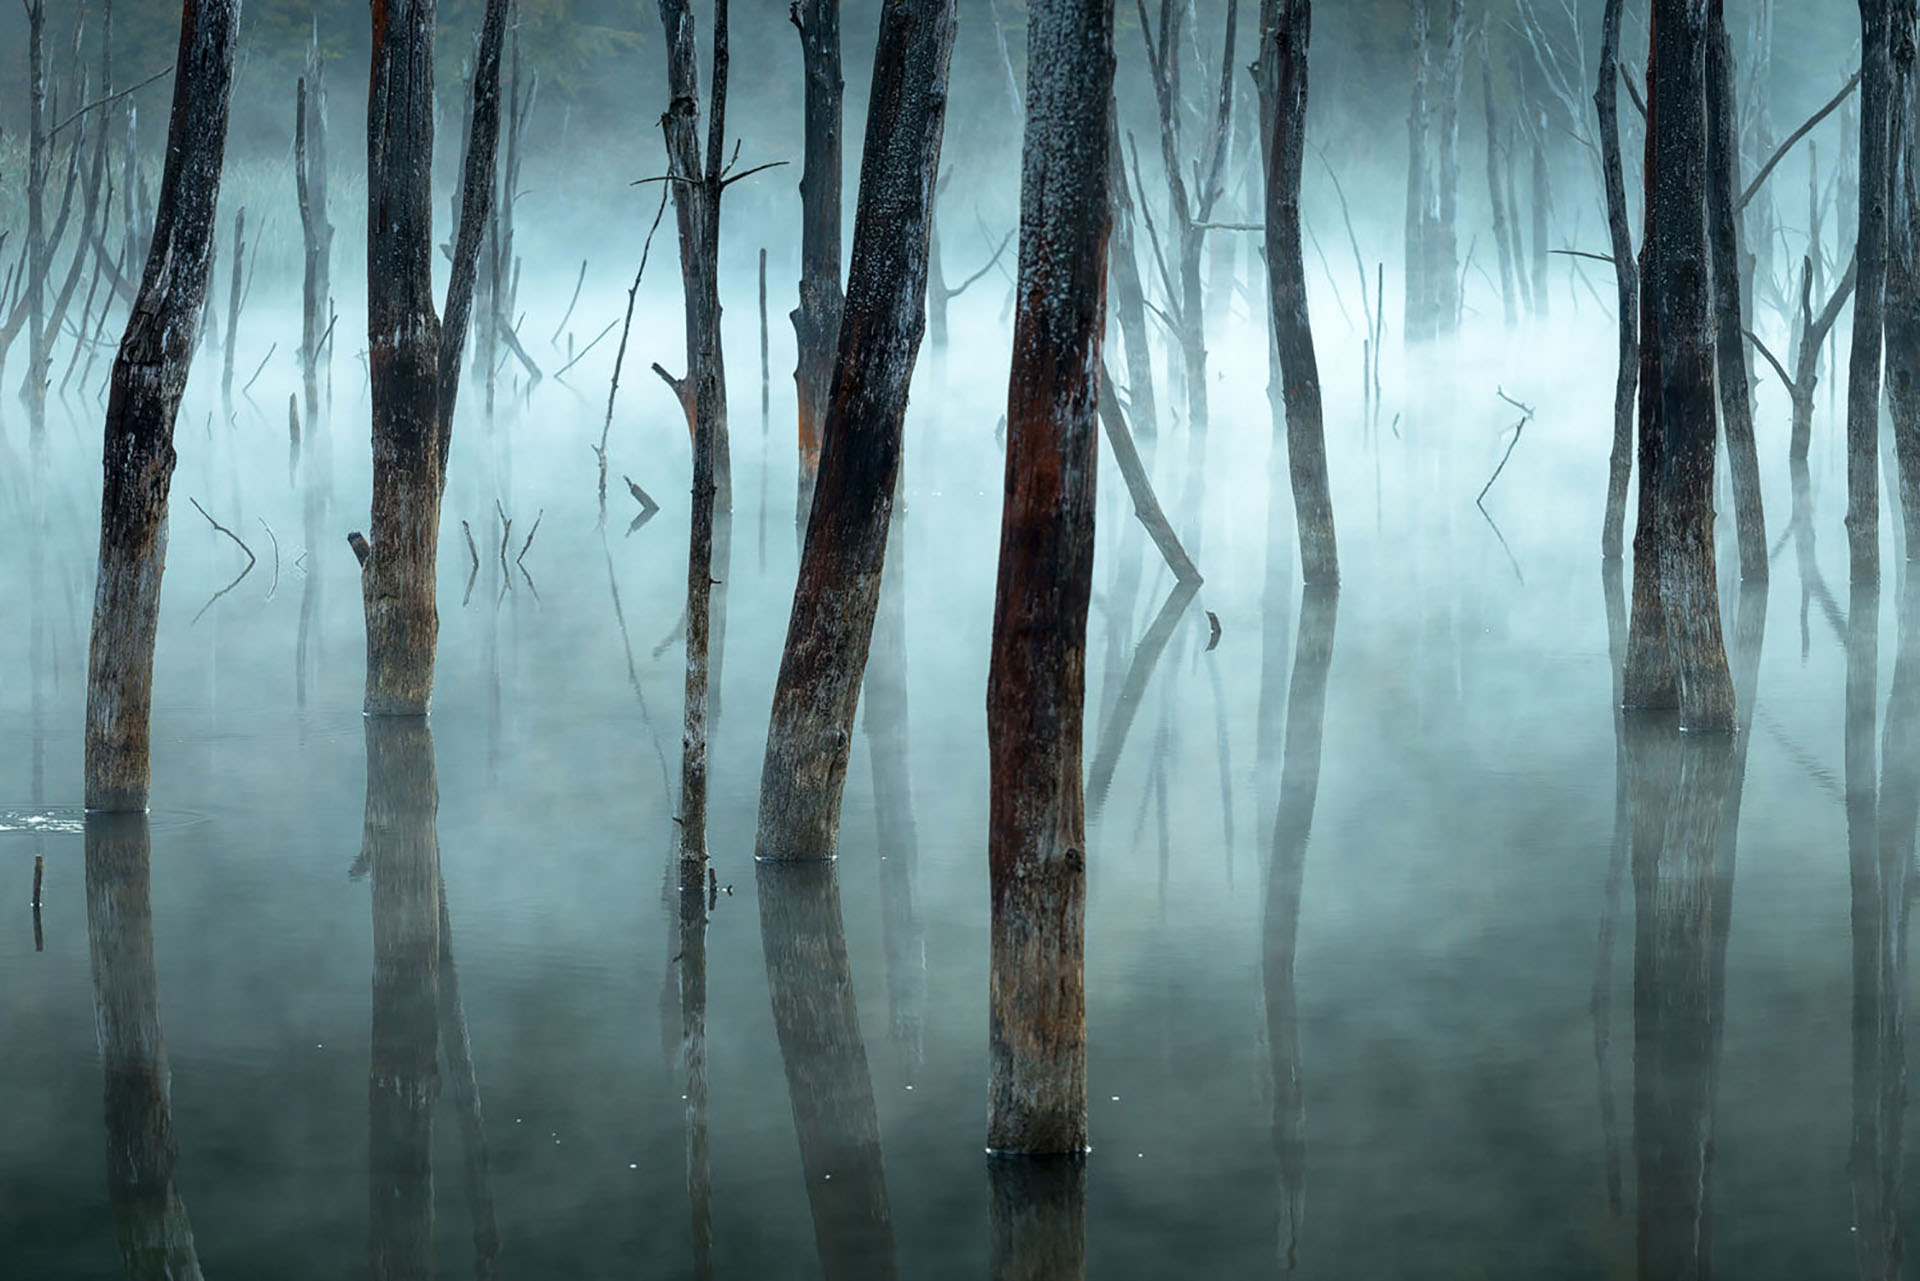 Dead trees in a natural dam, from an enchanted forest :)